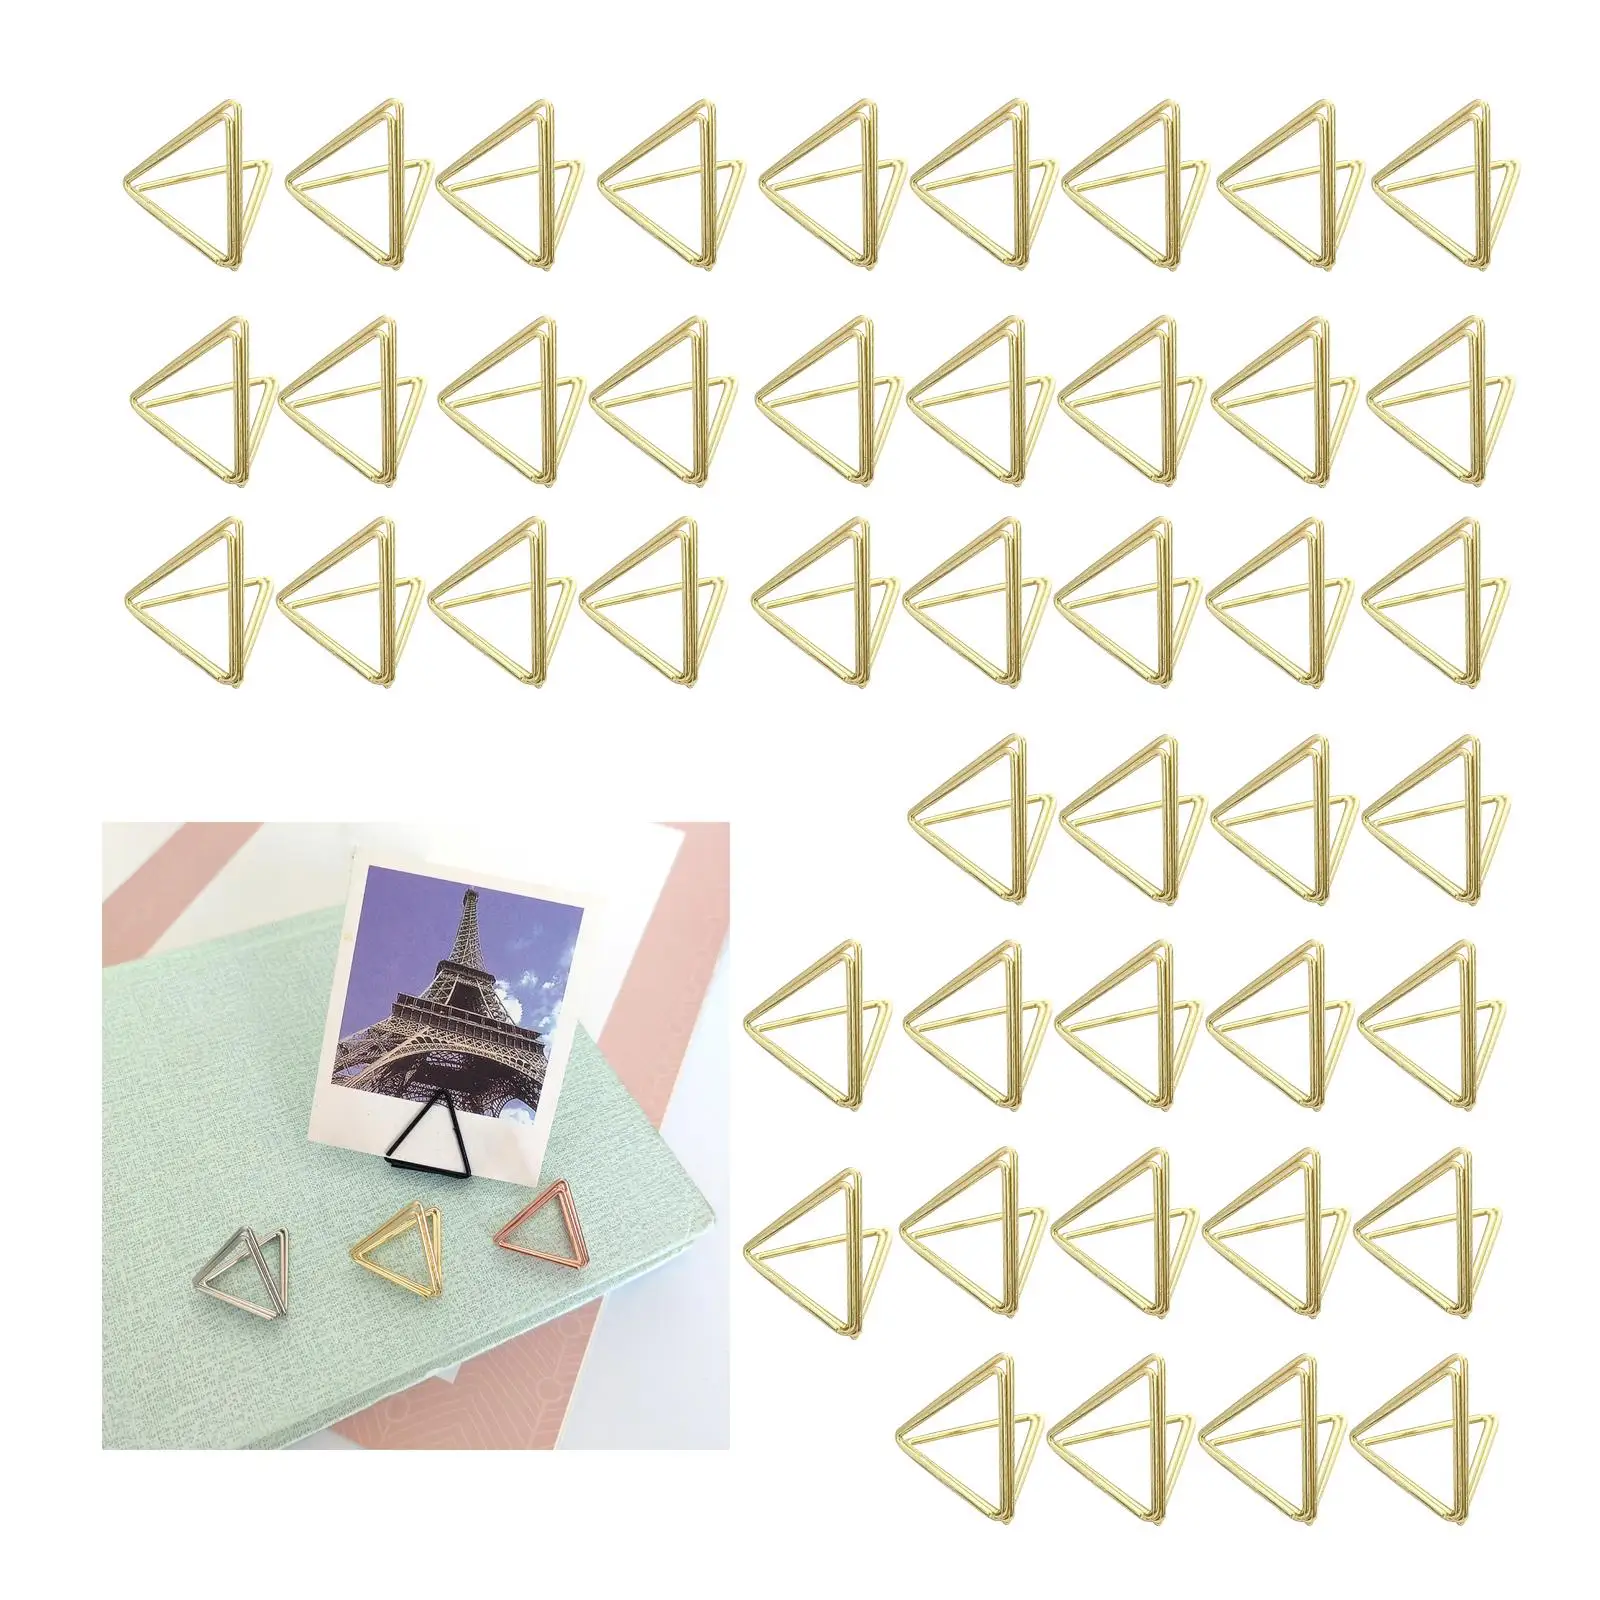 45Pcs Table Card Holders, Triangle Shape Wedding Table Number Holders, Photo Holder Pictures Stand Clips